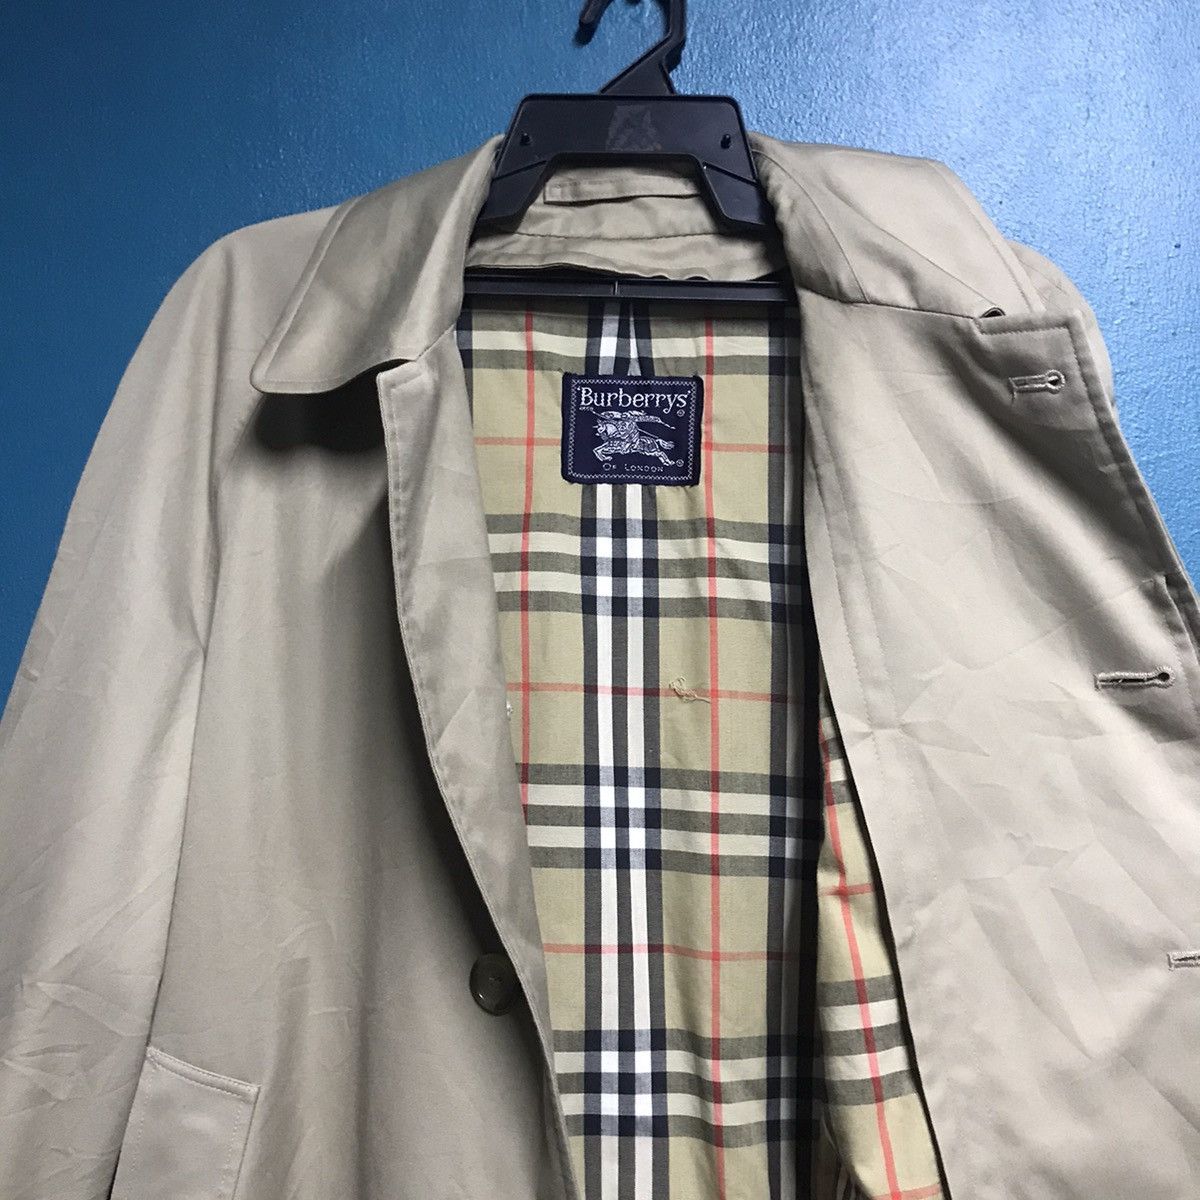 Burberry Prorsum Vintage burberry nova check trench coat with wool lining Size US L / EU 52-54 / 3 - 8 Thumbnail